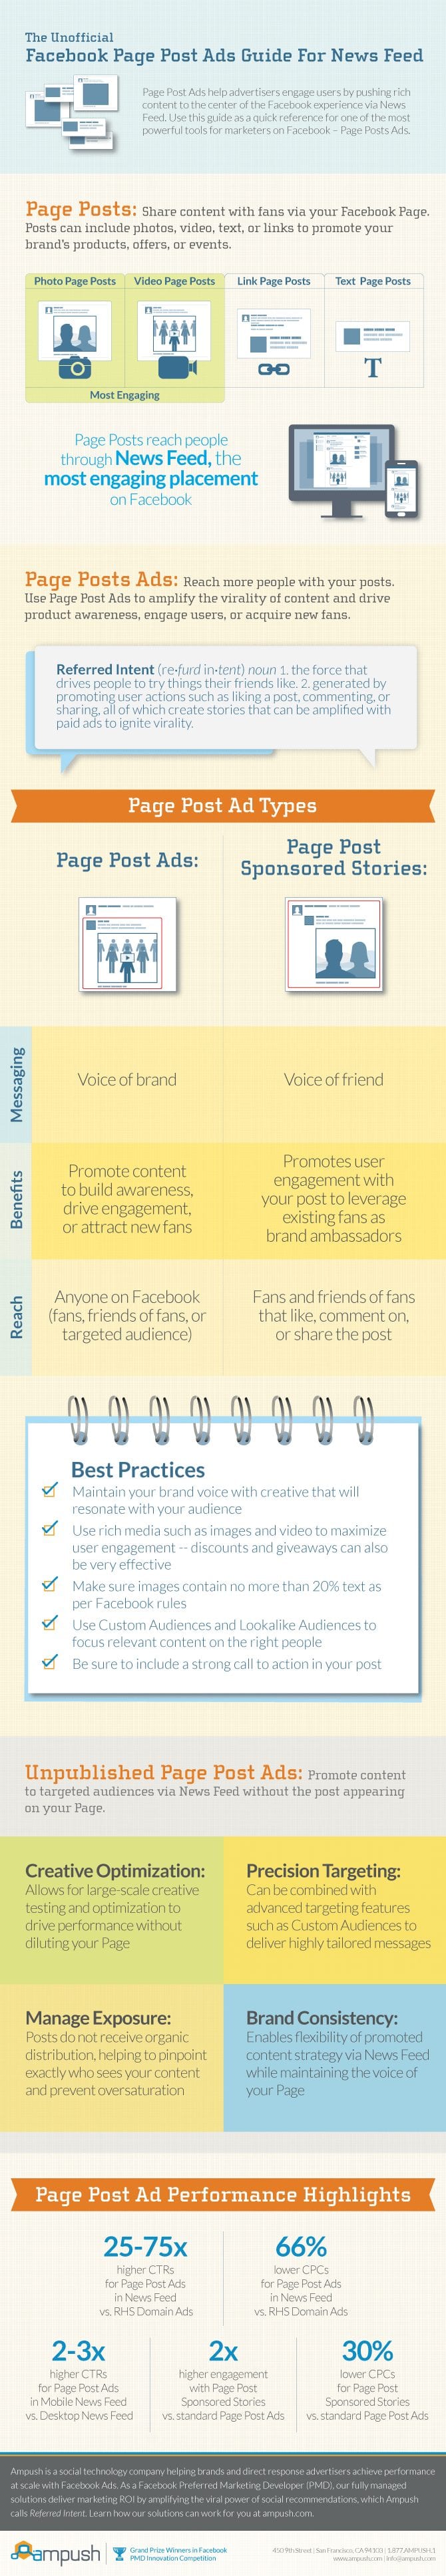 Facebook Page Post Ads [infographic]